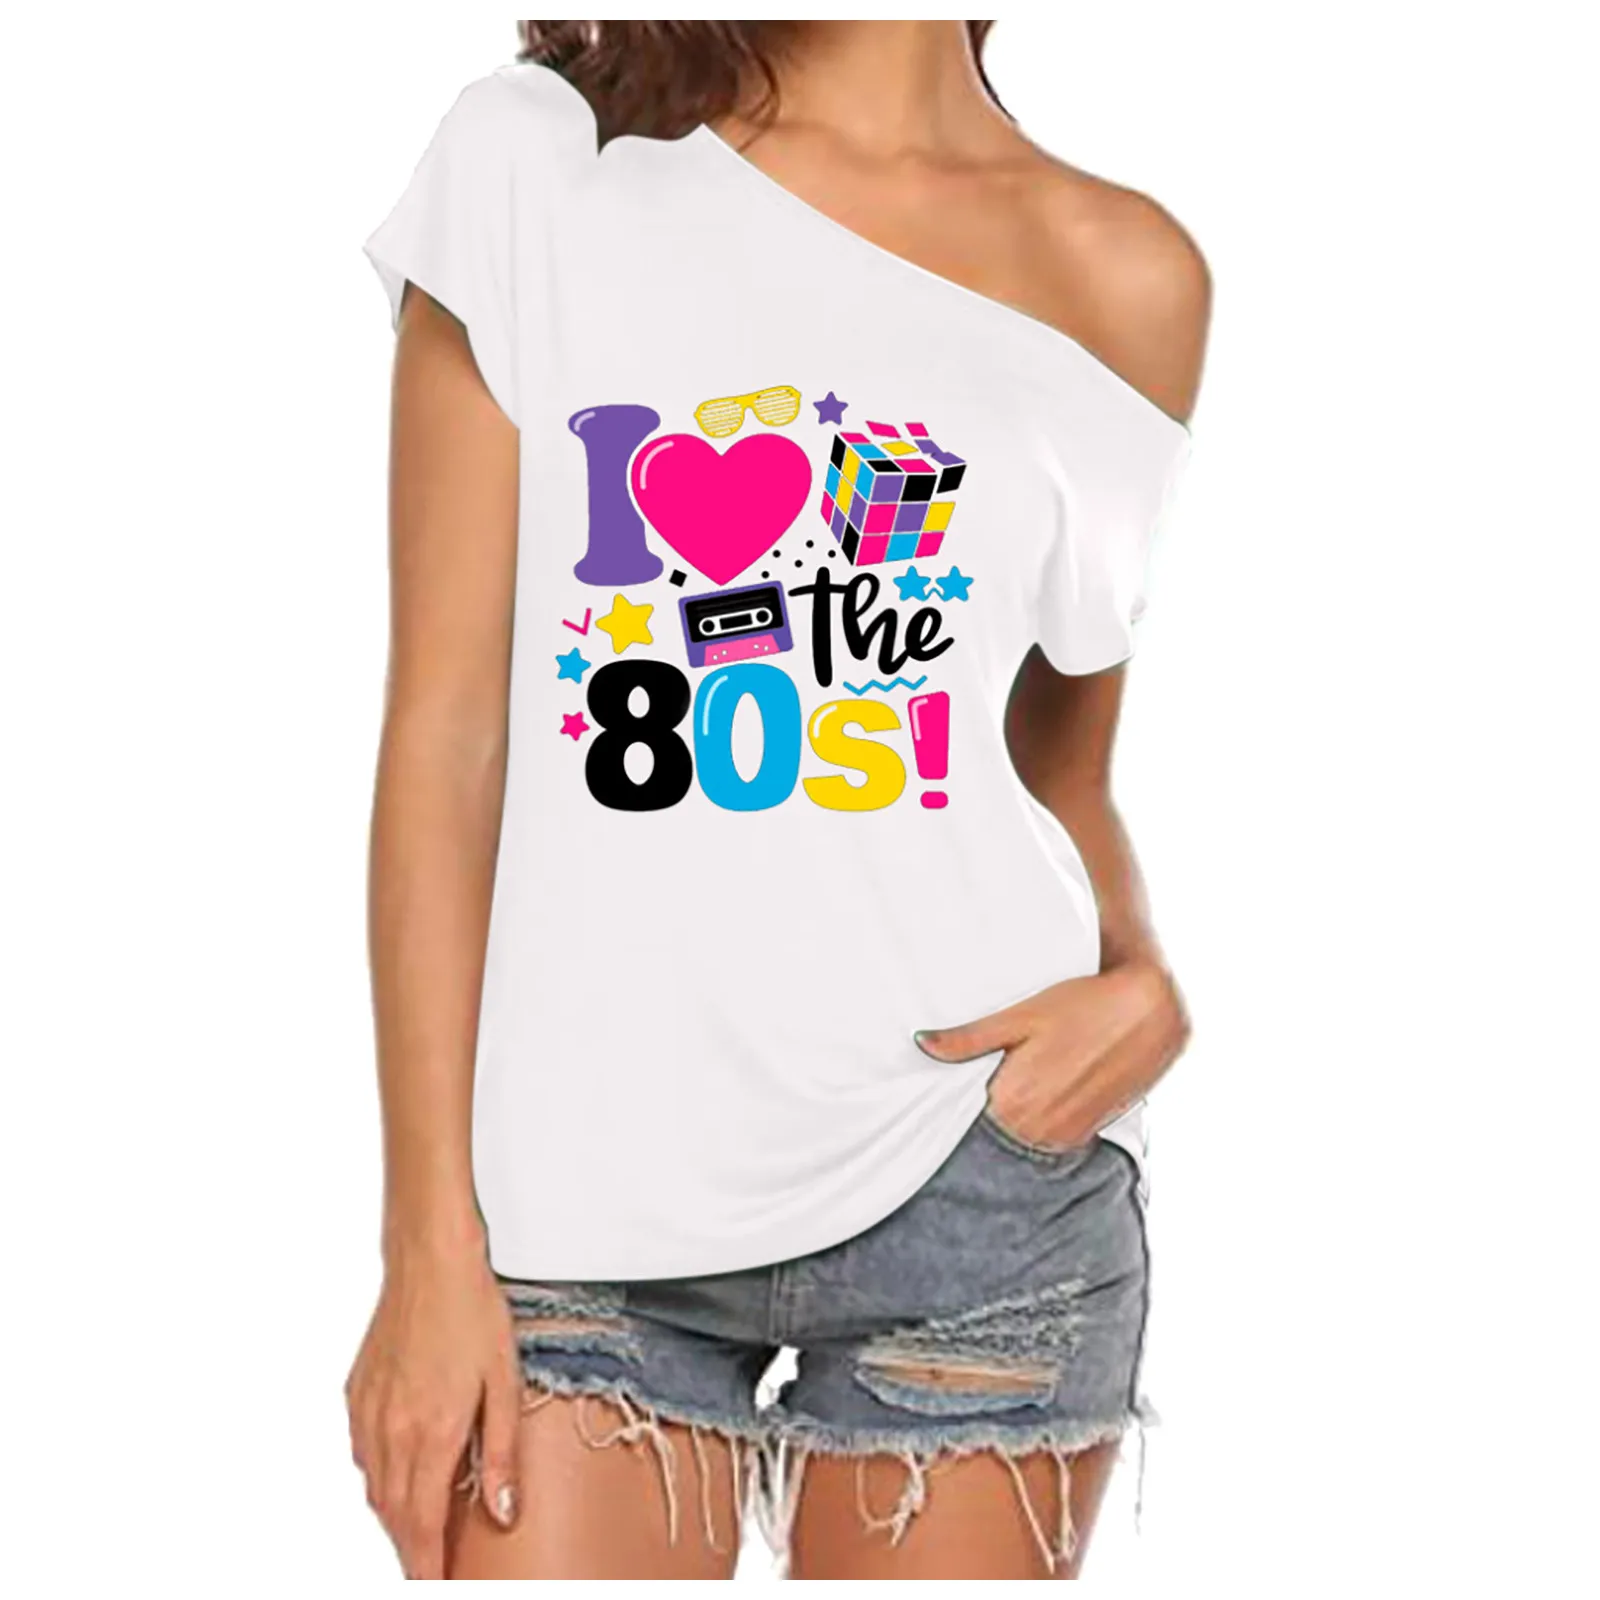 I Love The 80s Off The Shoulder Tops Female Summer Casual Short Sleeve Graphic Tees Streetwear Disco Costumes -S52a44af9337b4451ab6ff2a89e87cc5fJ